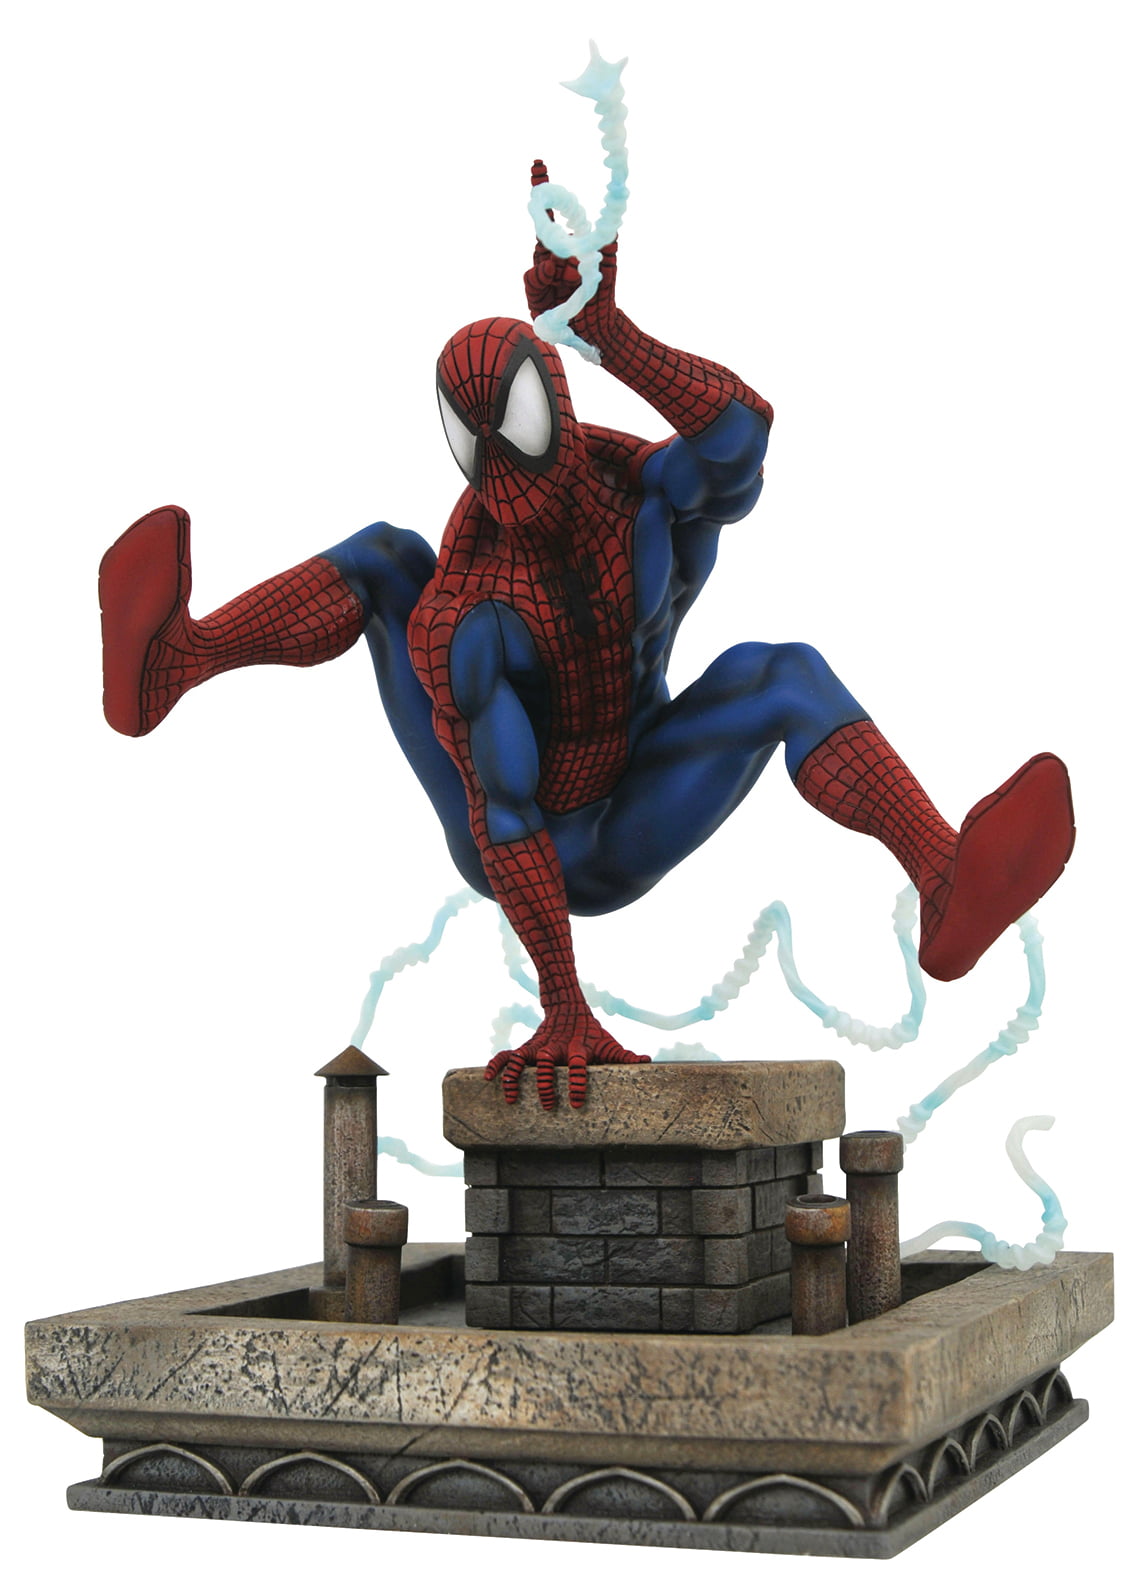 Marvel Gallery Spider-man Miles Morales PVC Statue 7 Inches Tall Diamond Select for sale online 